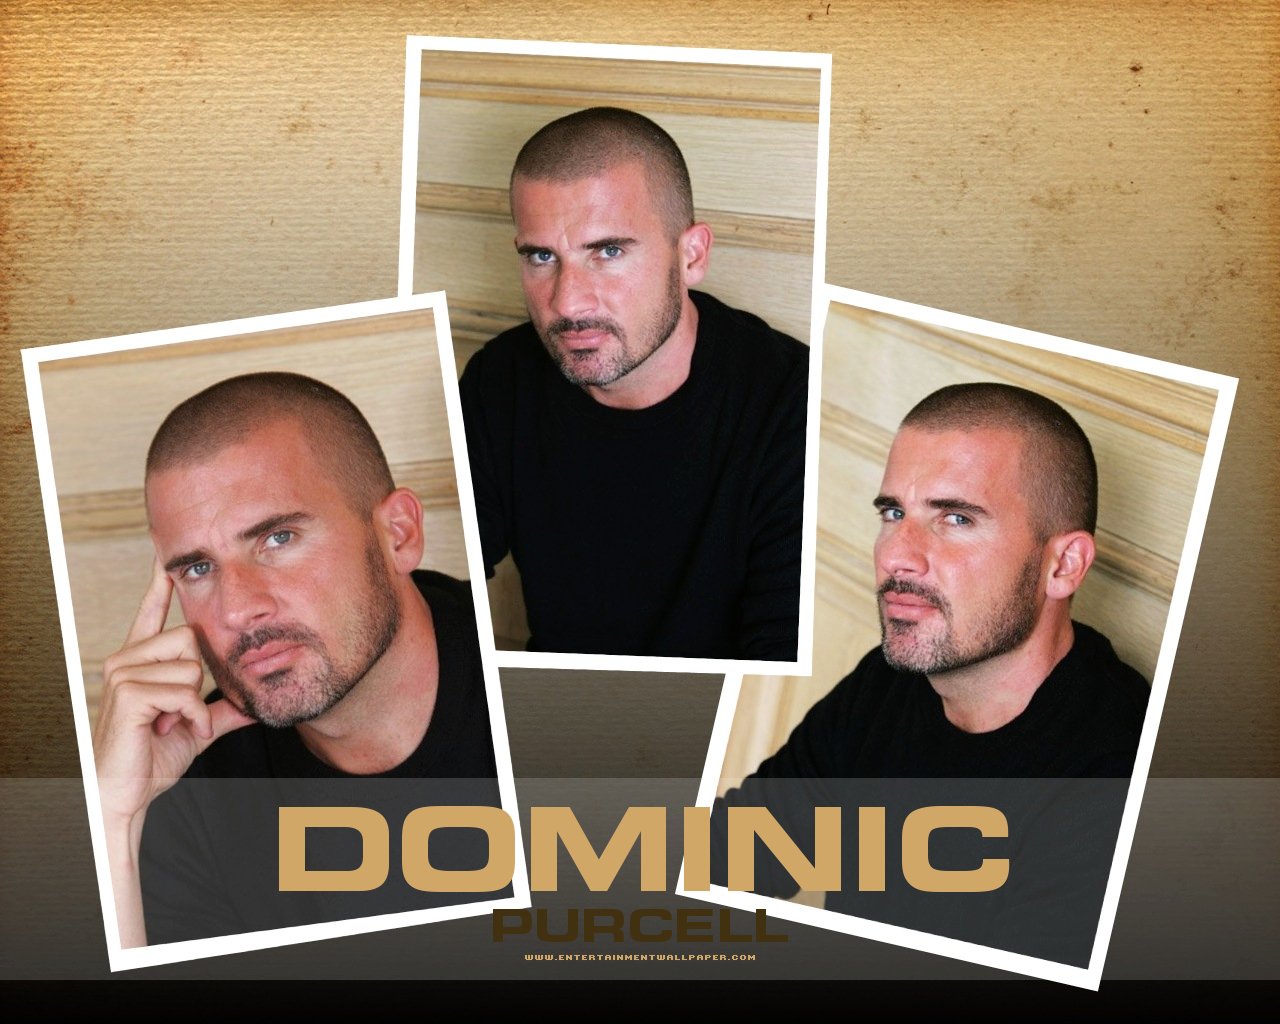 Imelda Mcconnell: dominic purcell background